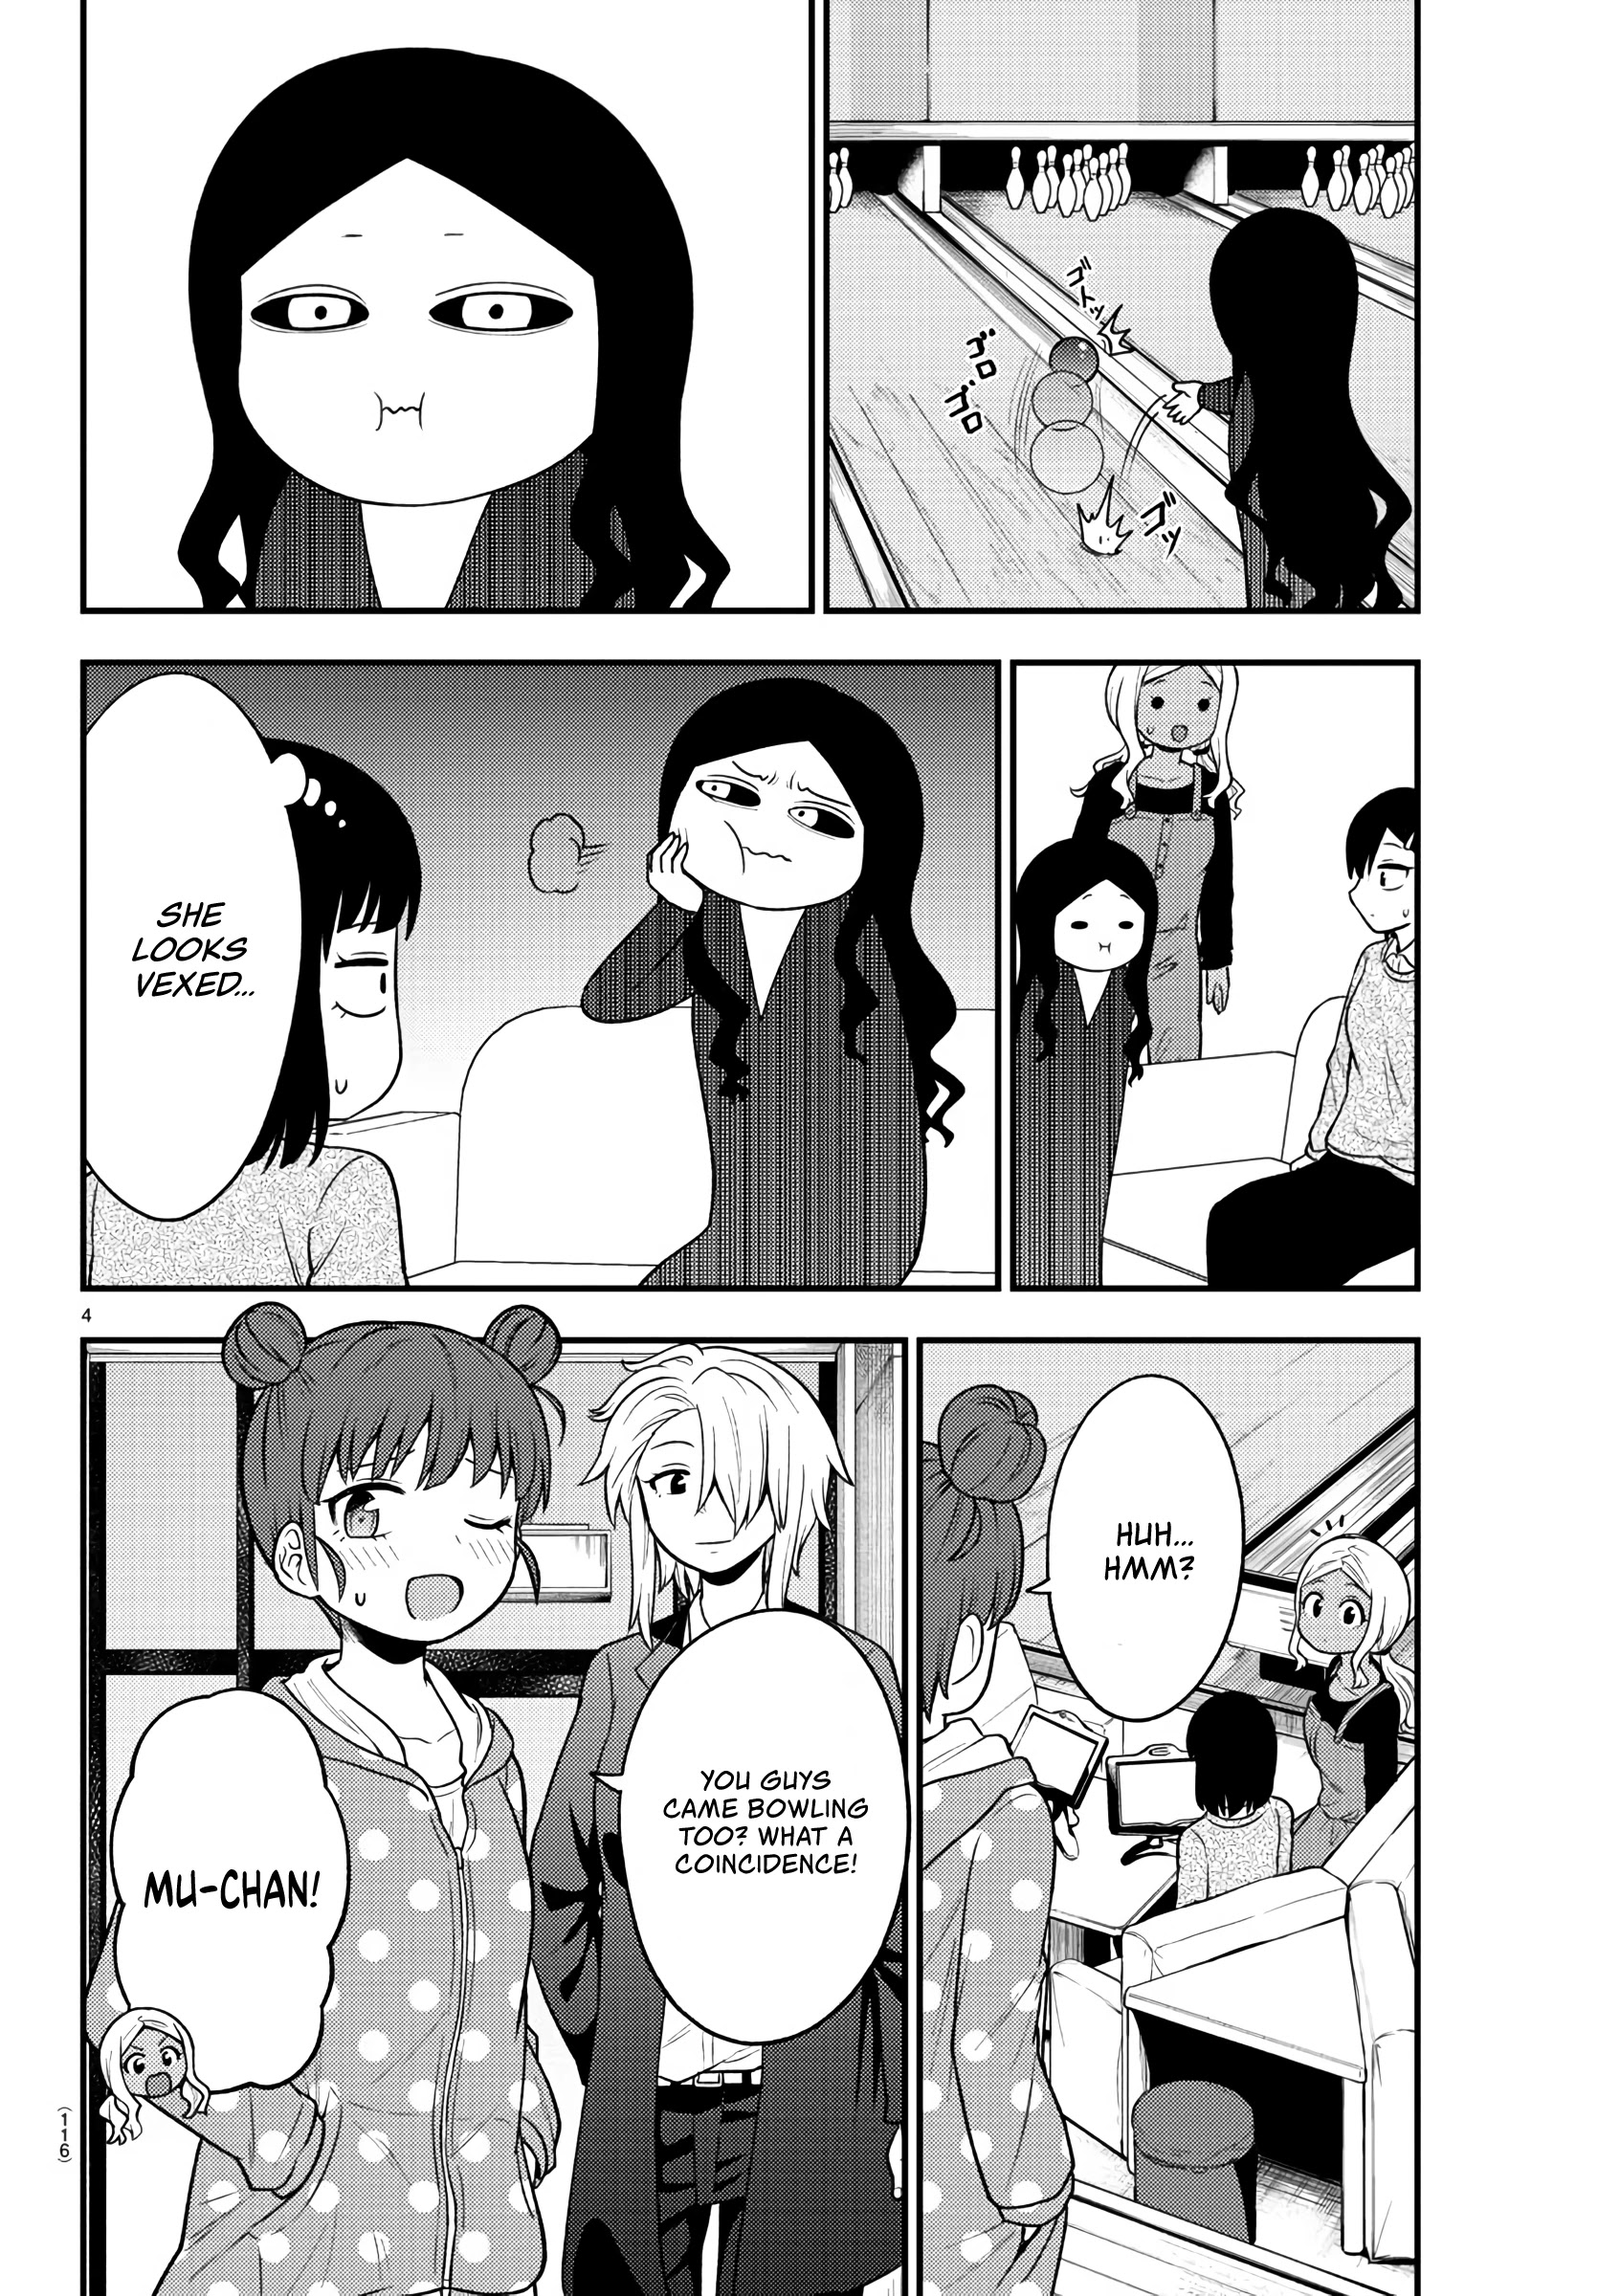 There's A Ghost Behind That Gyaru - chapter 24 - #4